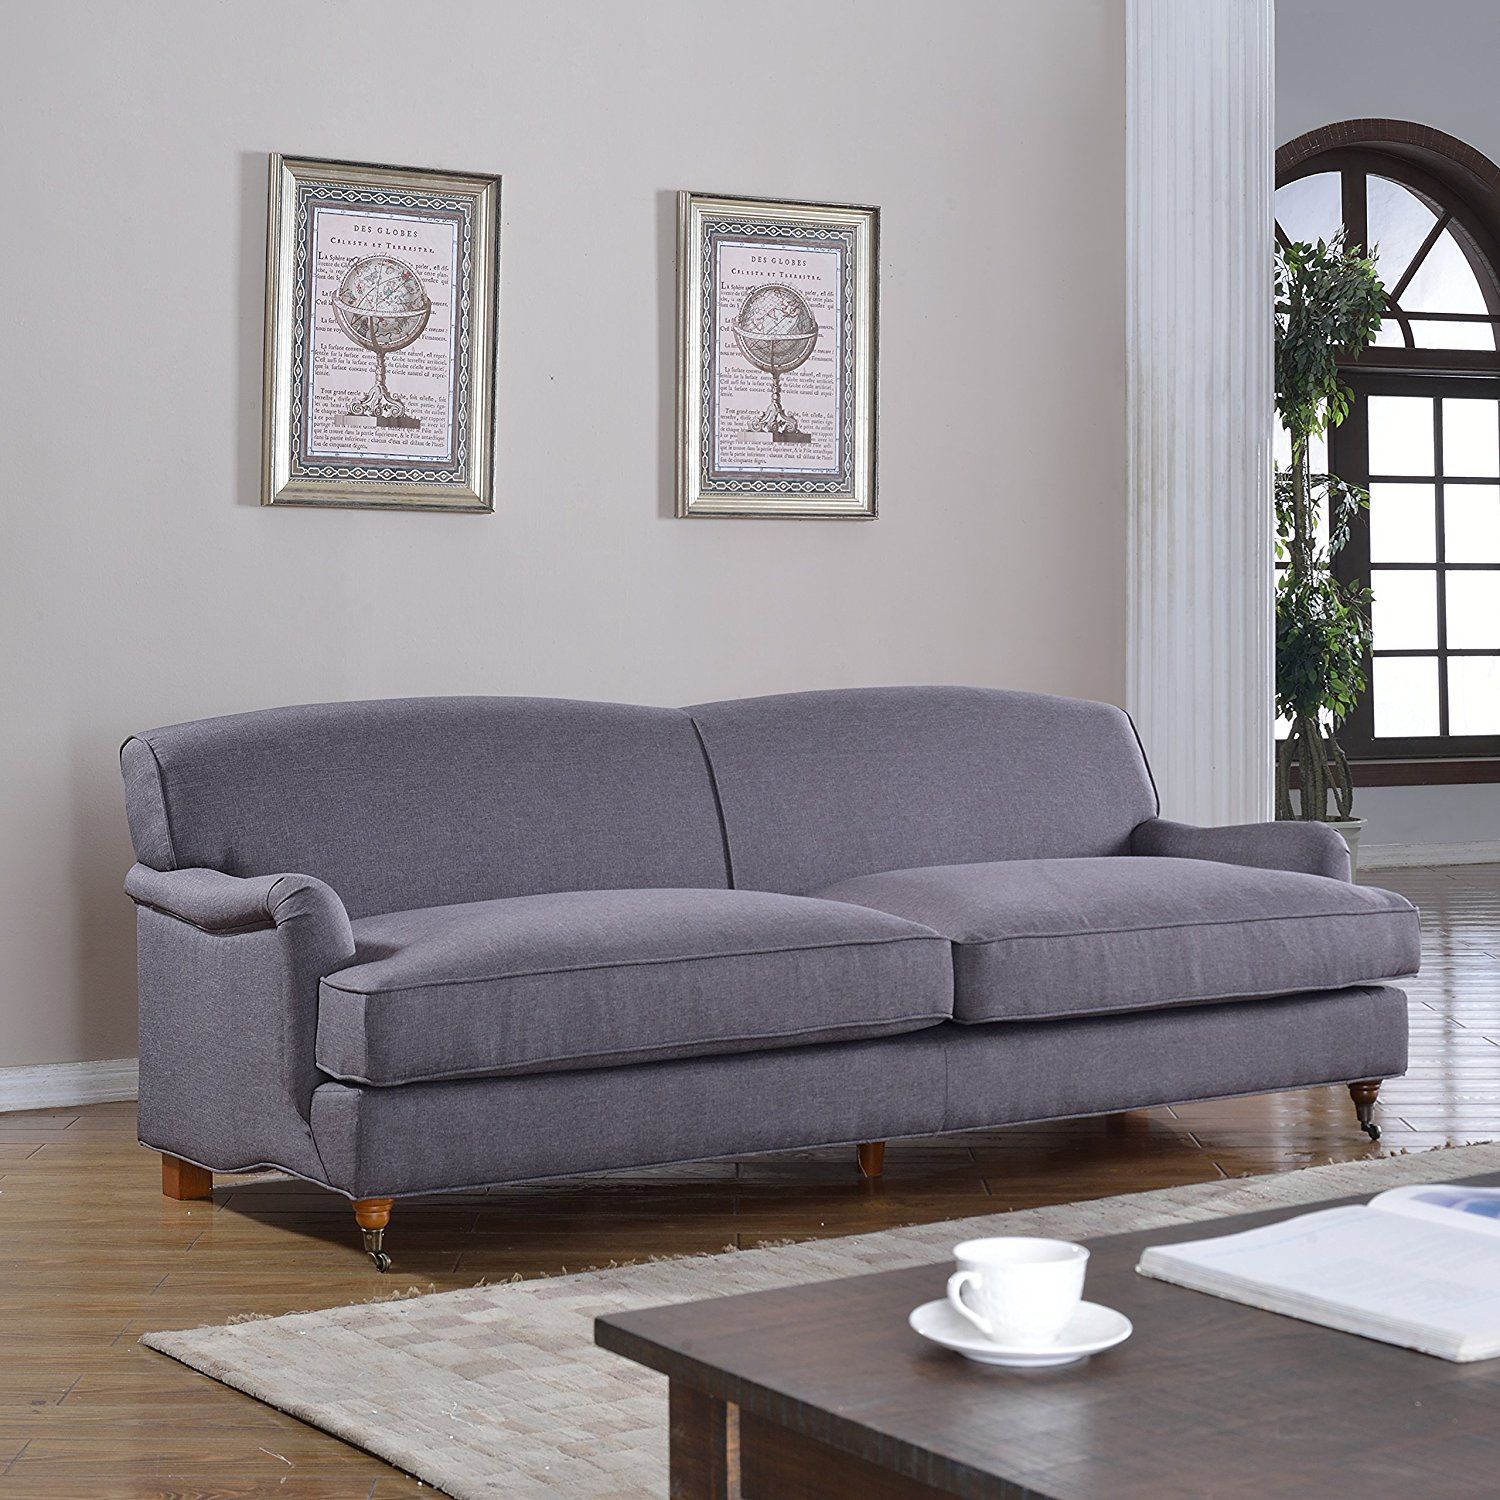 Amazon: Mid Century Grey Modern Sophisticated Large Linen Fabric Throughout Gray Linen Sofas (View 5 of 20)